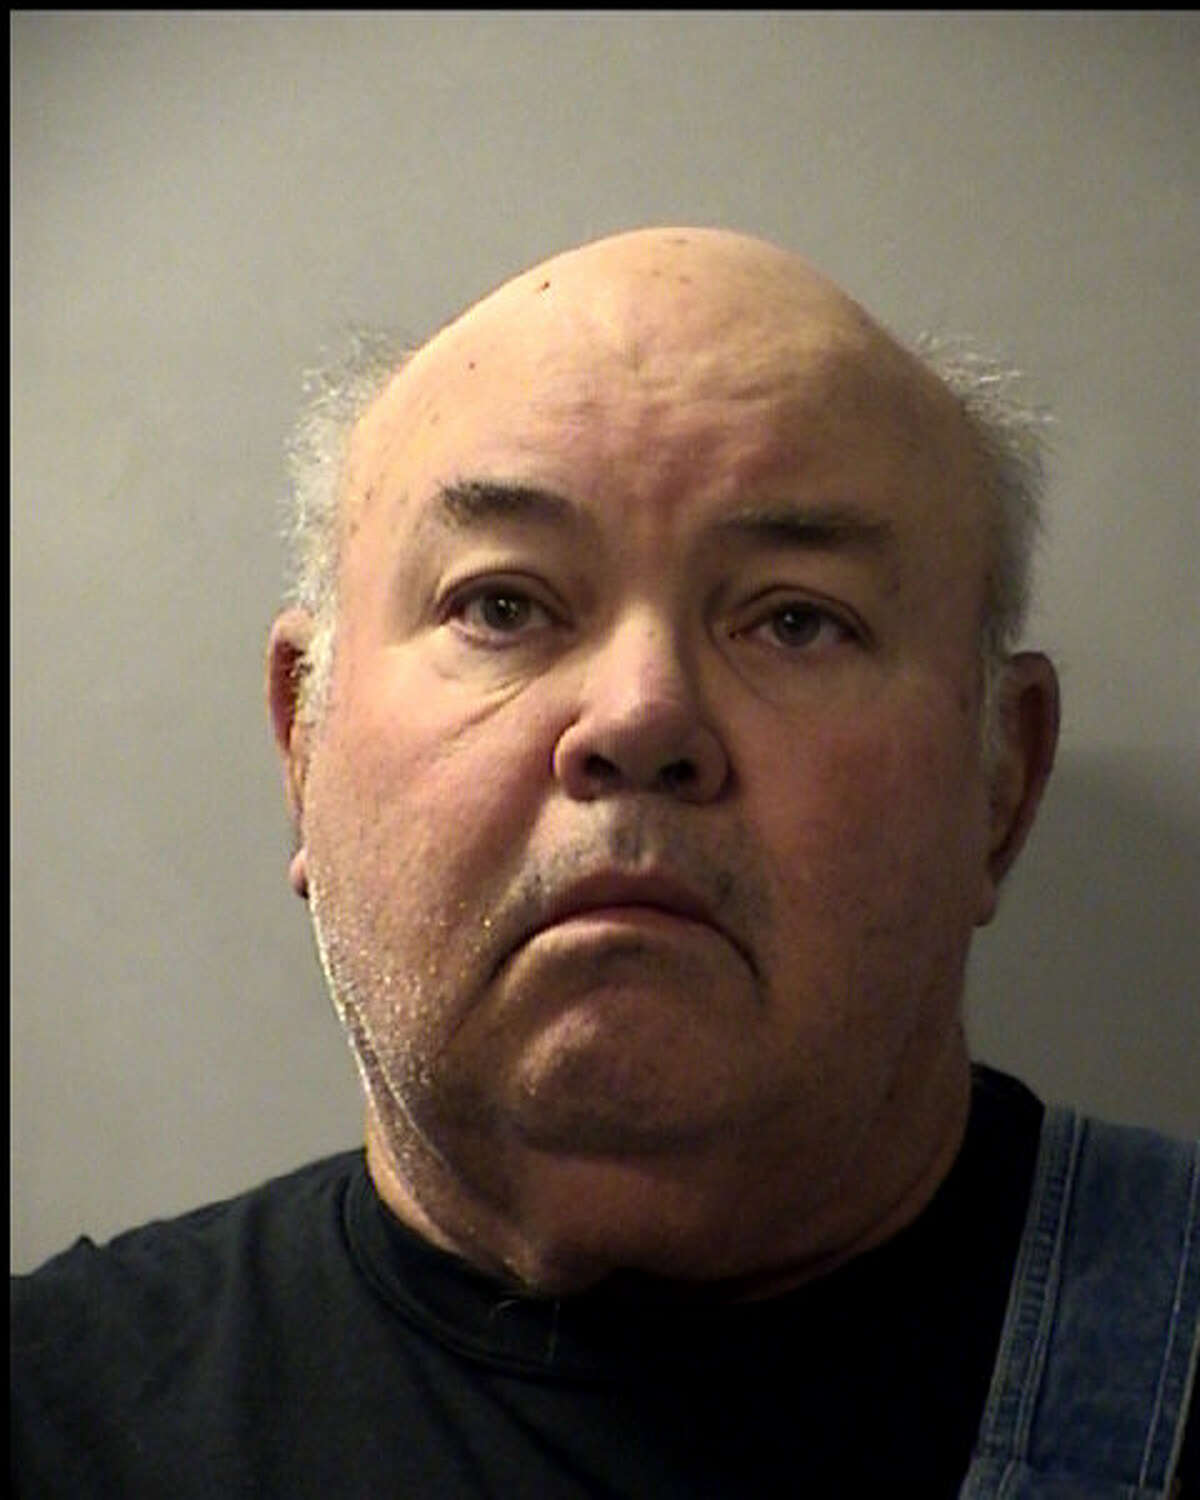 Gary Moore is charged with possession of illicit prescription pills, a felony, in Harris County.